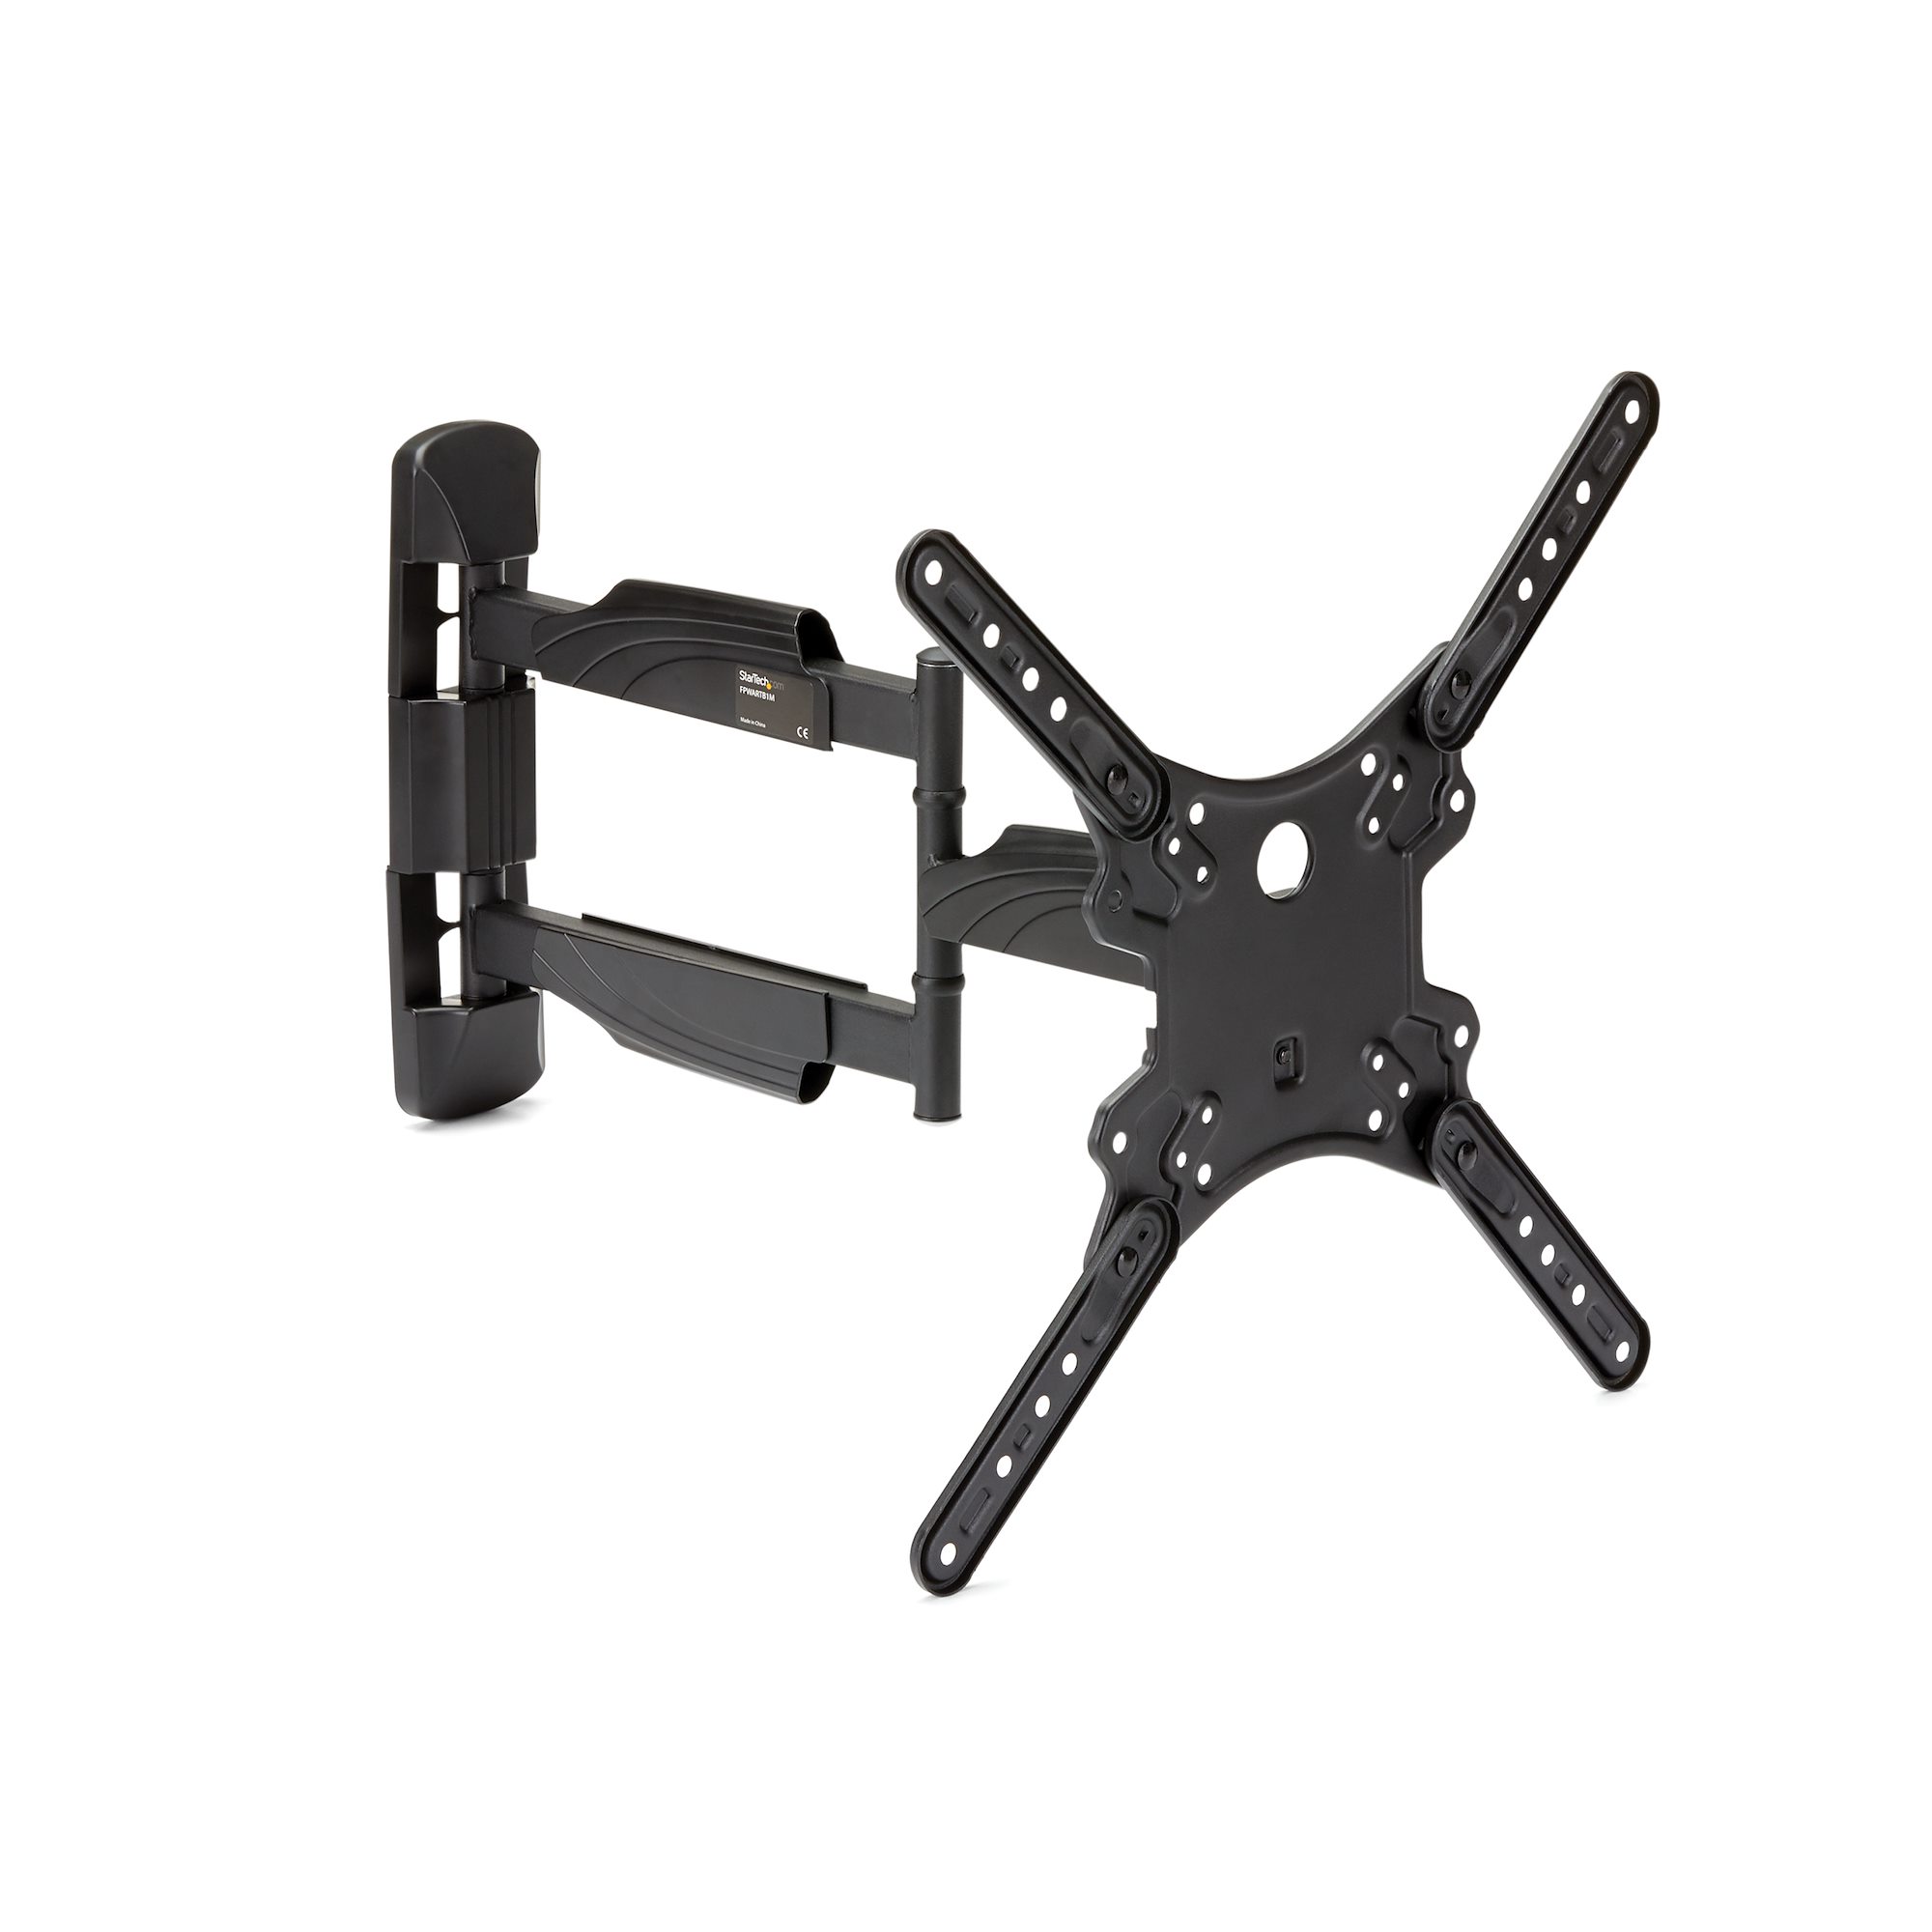 Full Motion TV Wall Mount 10-40 in Bracket with Swivel up to 44lbs VESA 200X200 